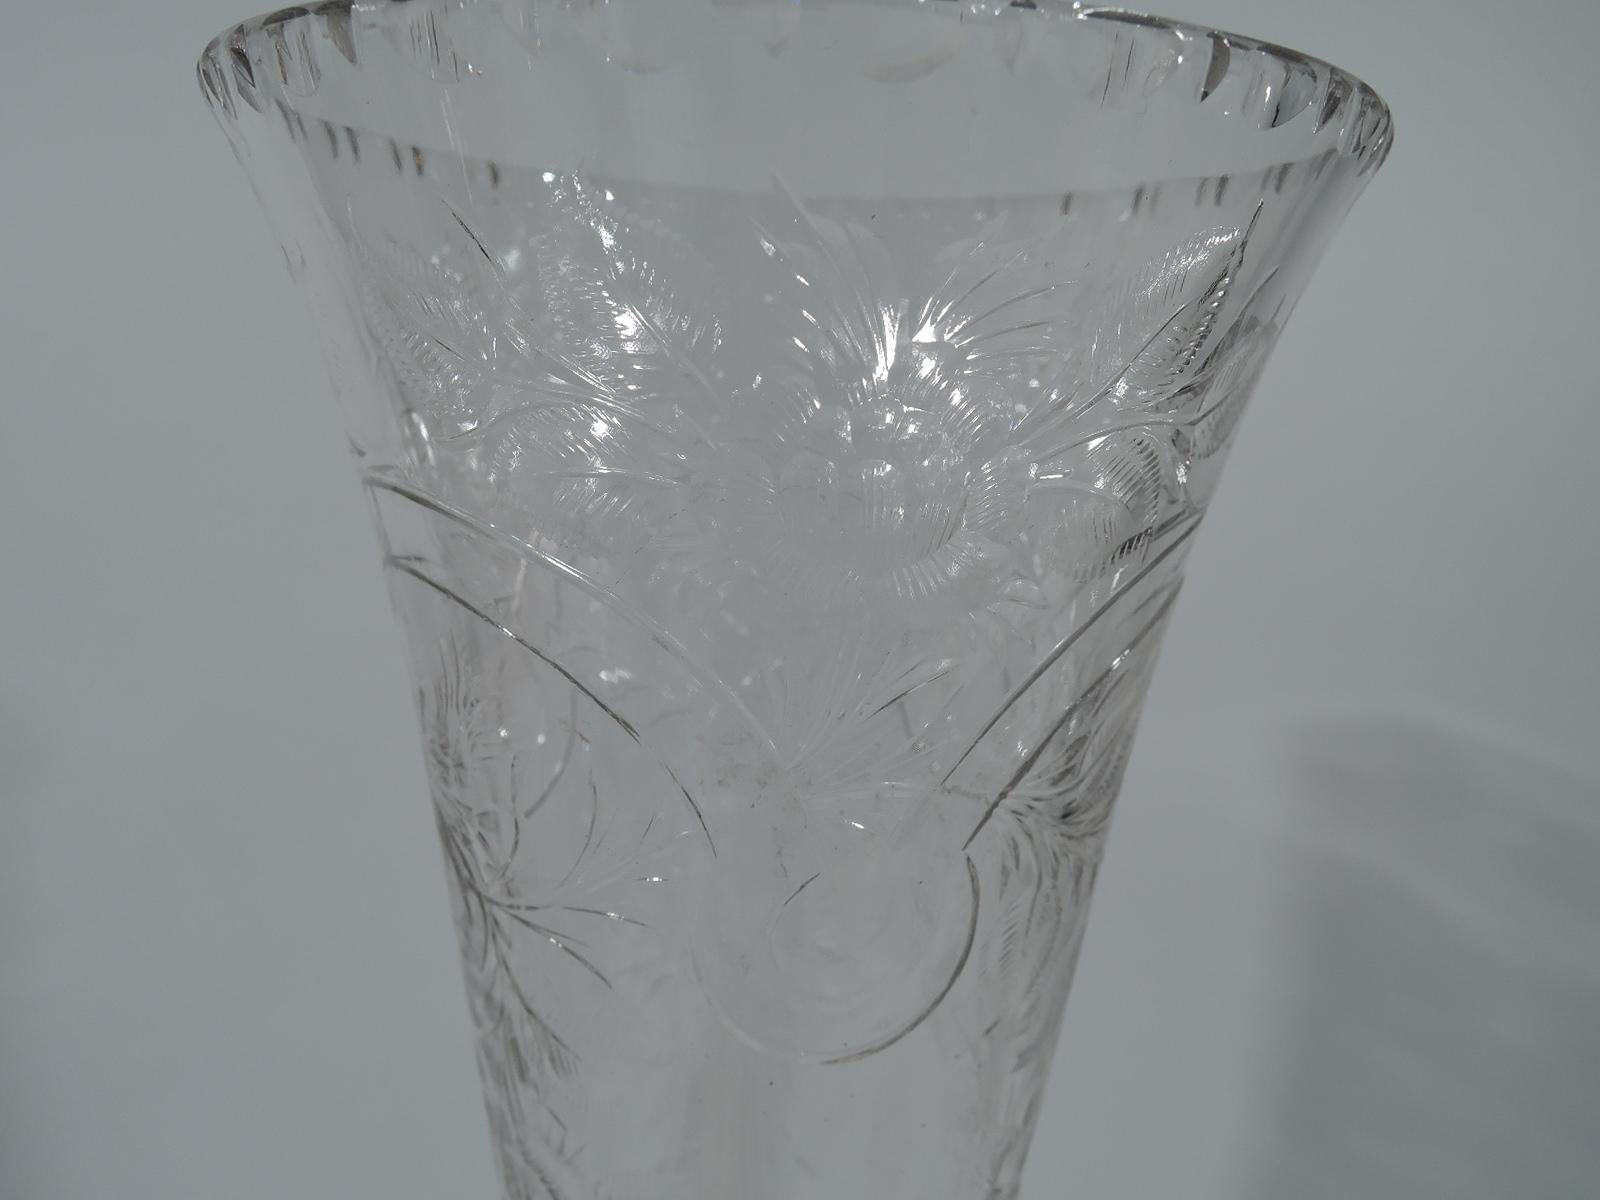 American Edwardian sterling silver and crystal trumpet vase, circa 1910. Clear crystal with etched flowers and overlapping strapwork arcade. Notched egg-and-dart rim and fluting at bottom. Domed sterling silver base. Hallmark includes Fifth-Avenue